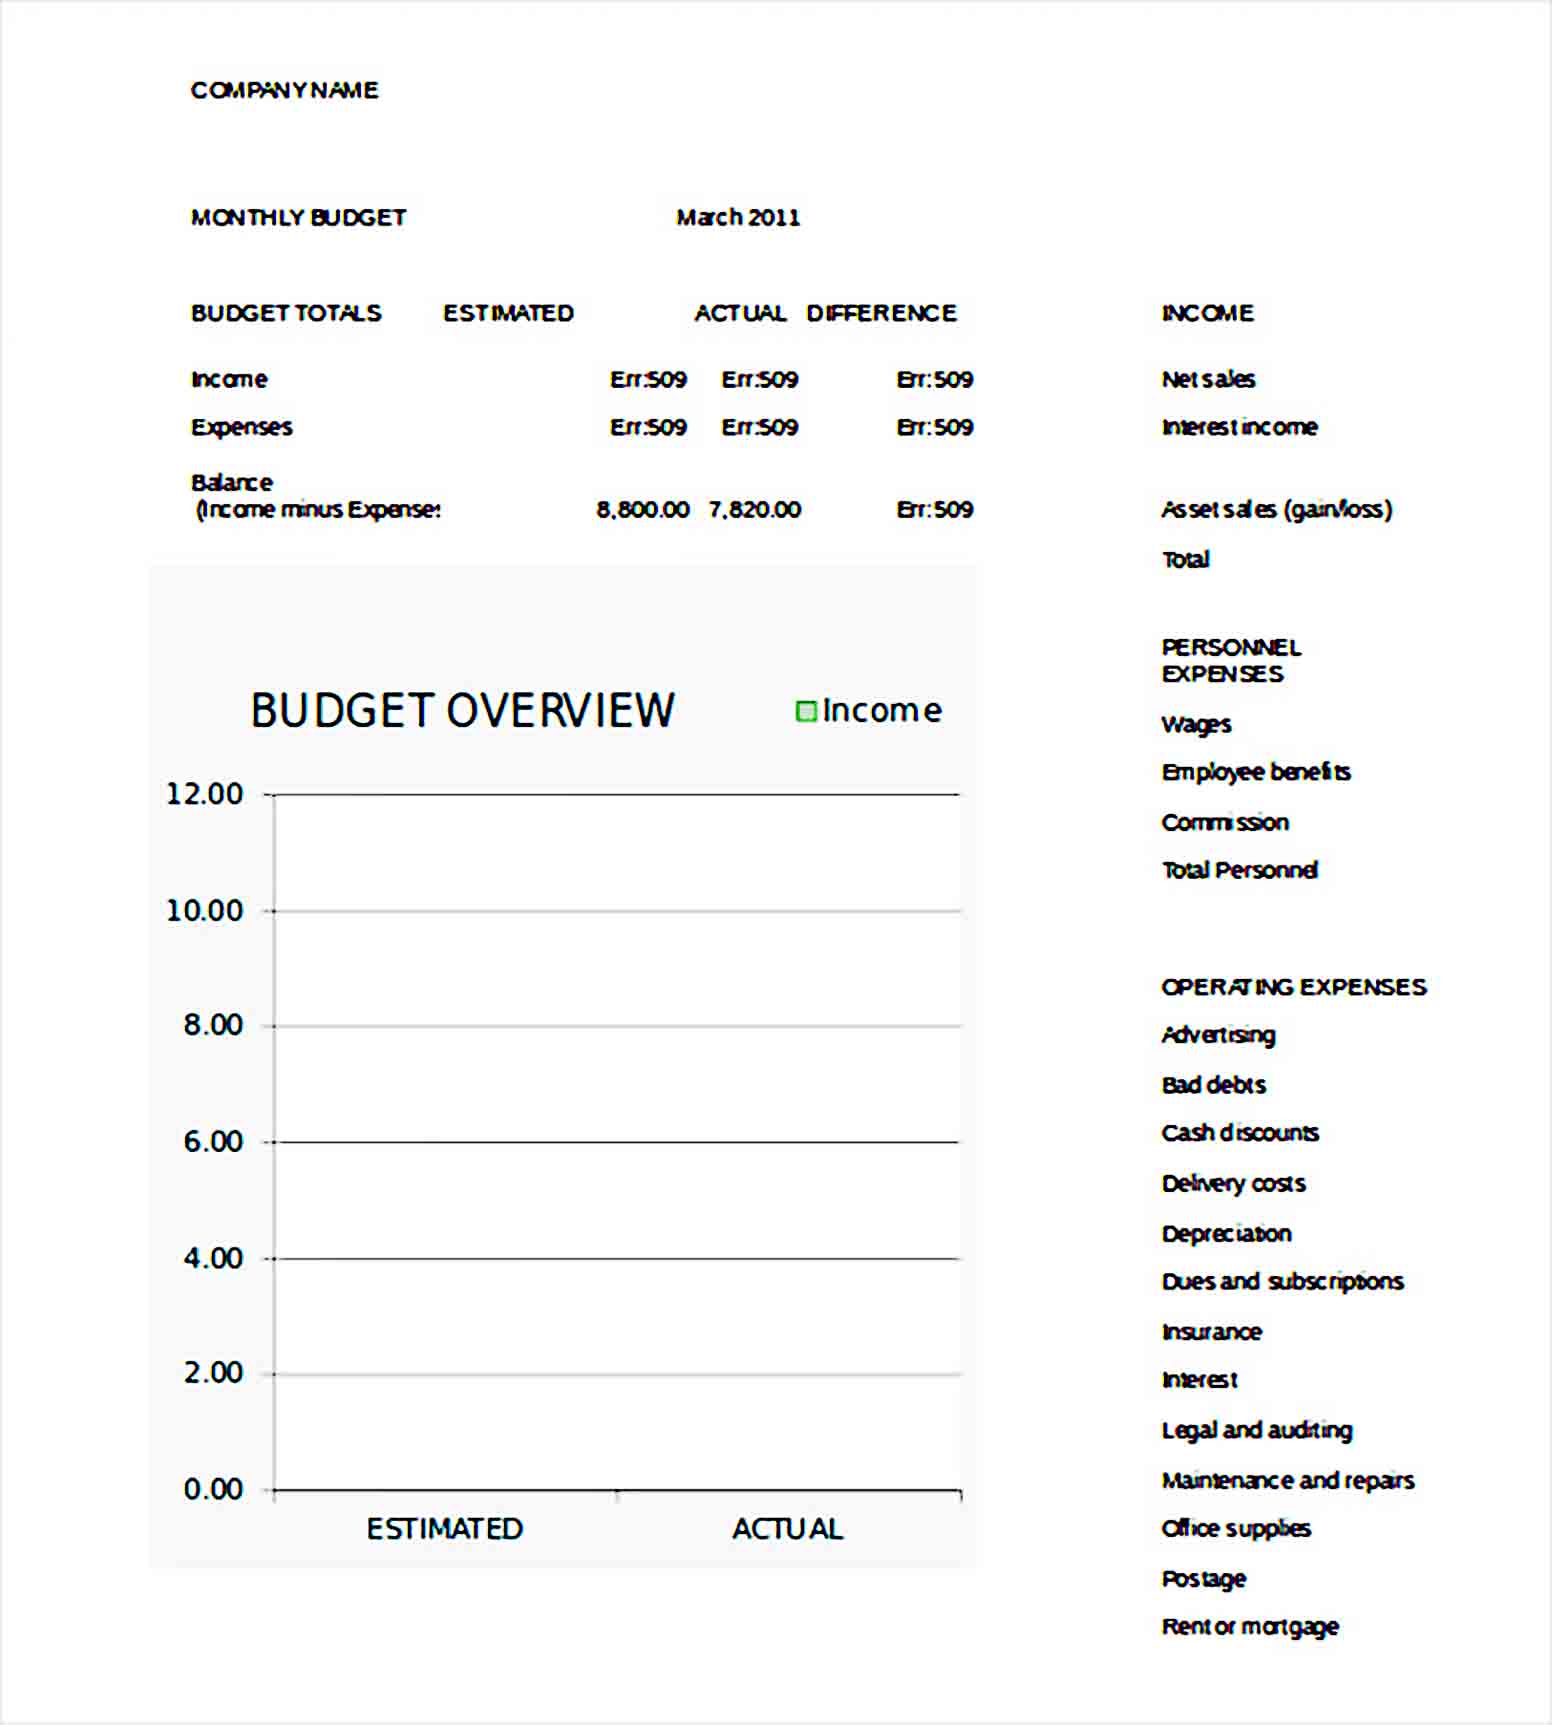 Monthly Business Budget Template